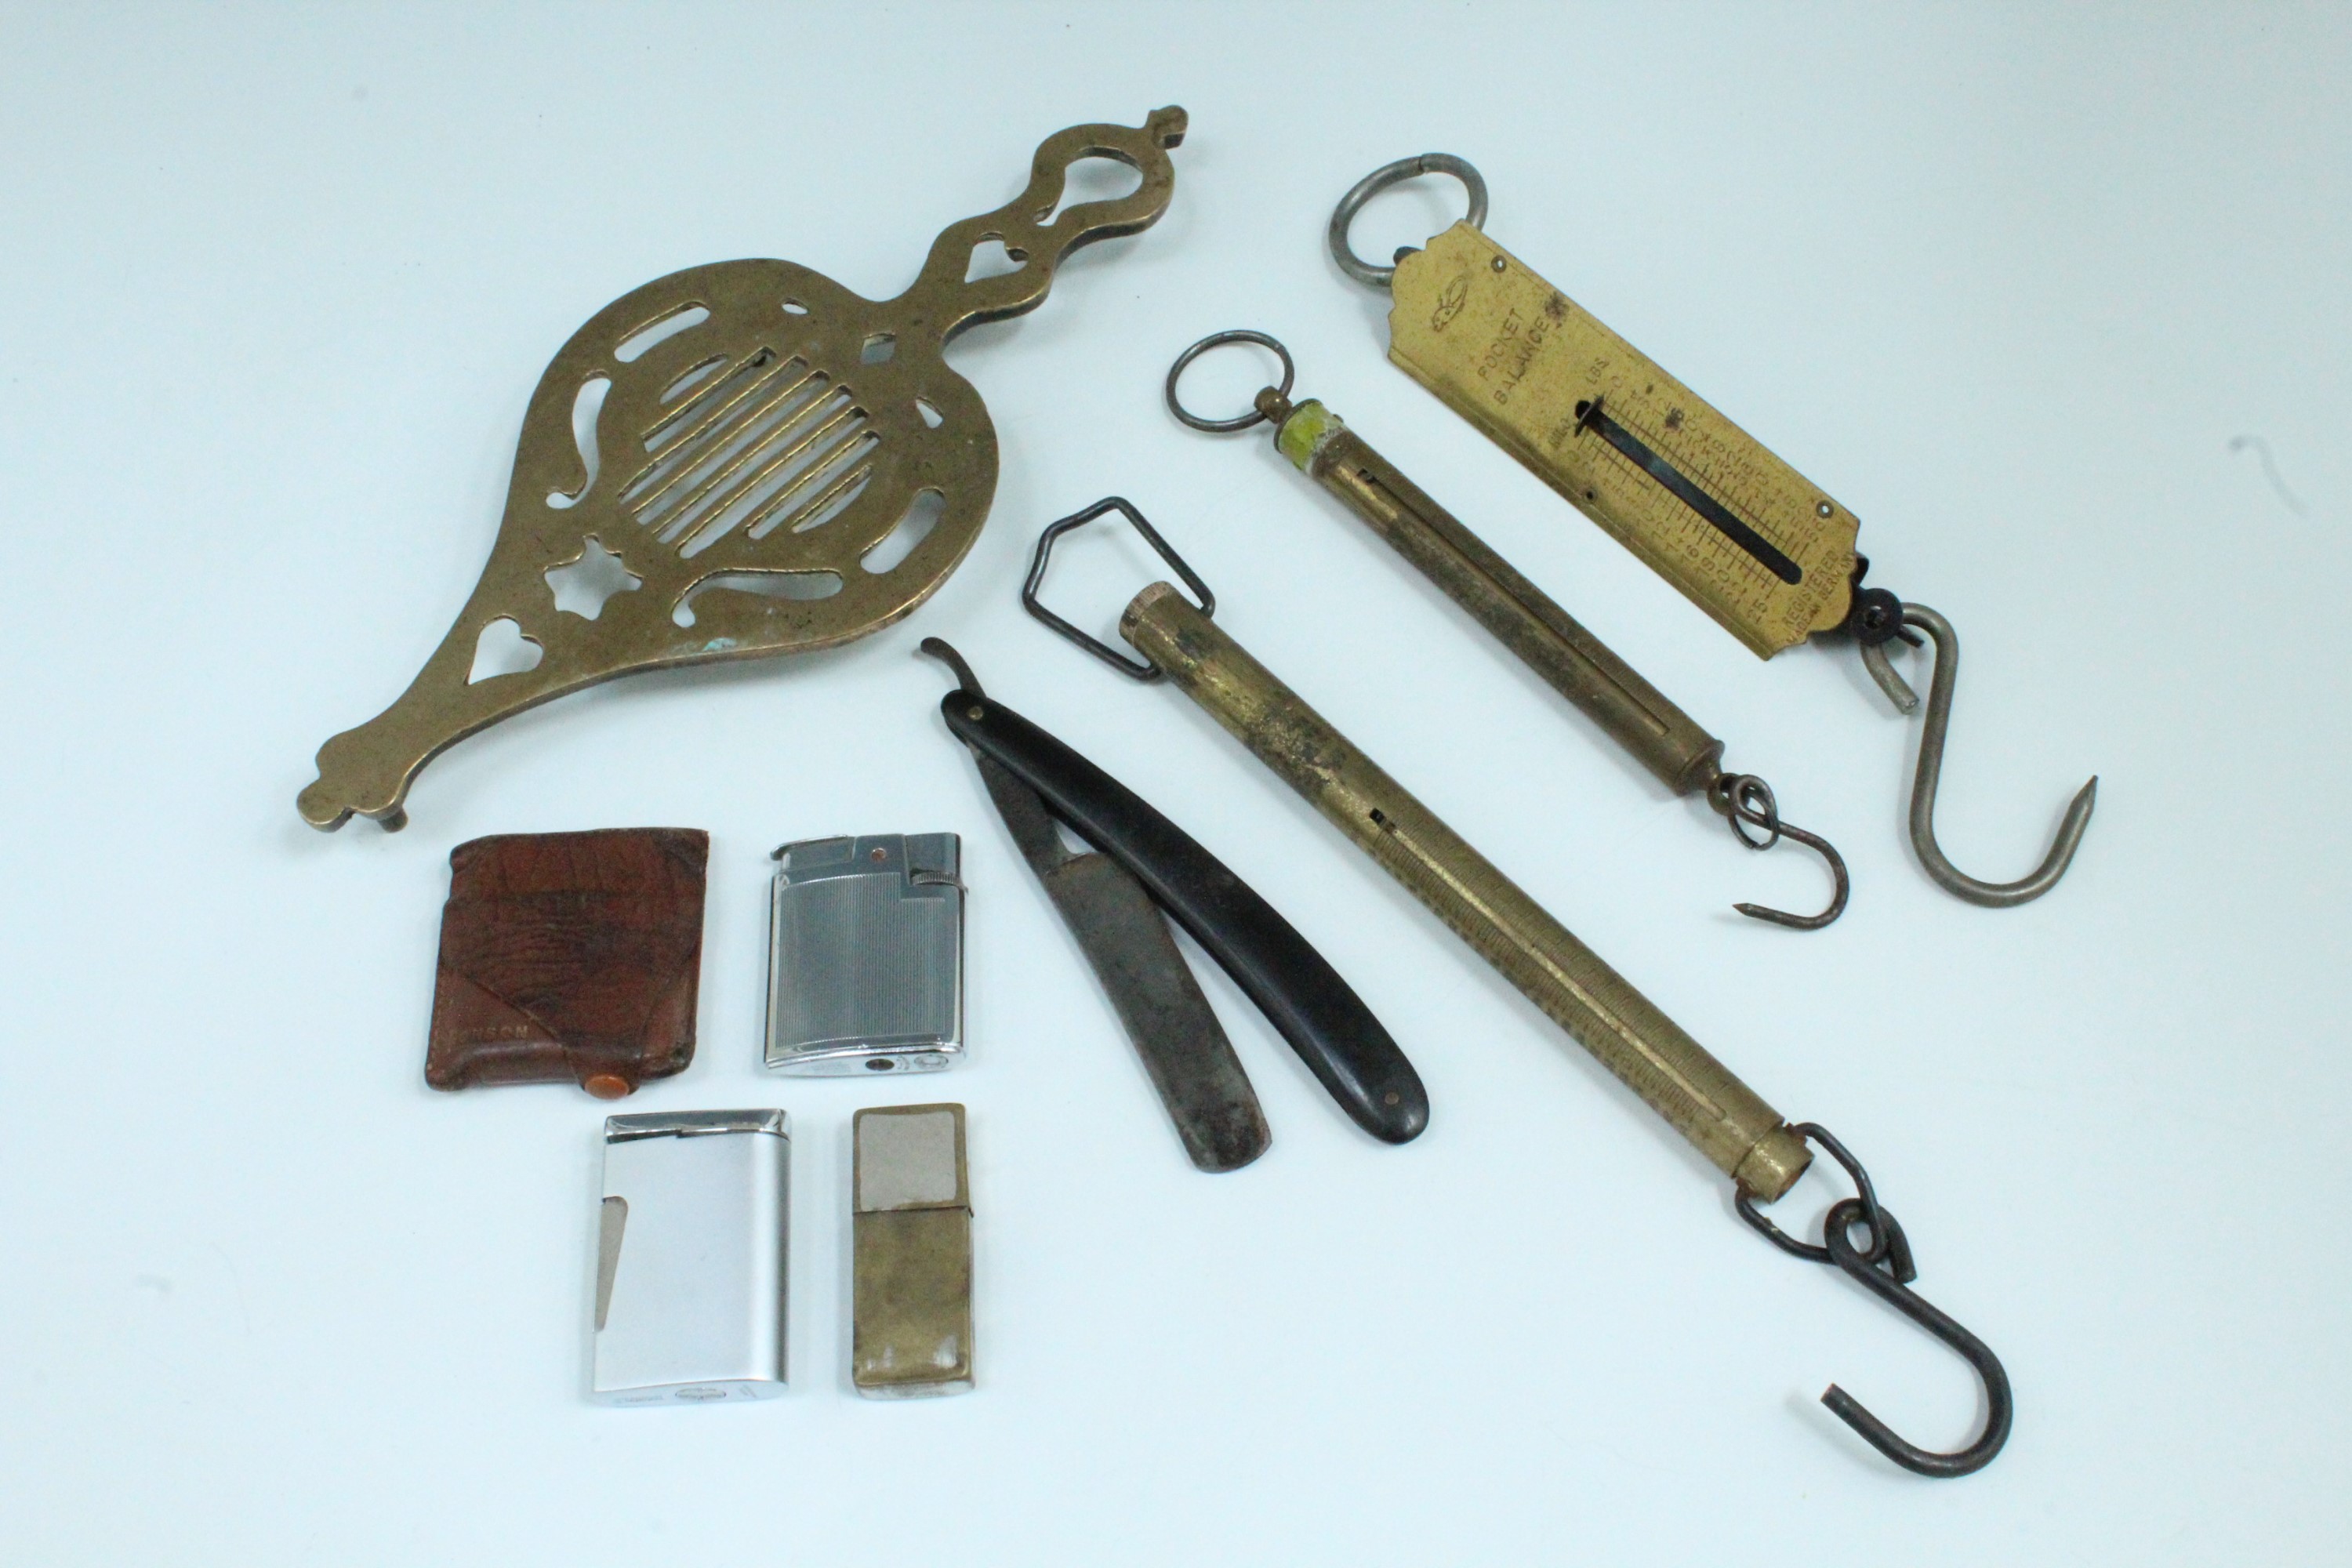 Sundry collectors' items including Ronson and other vintage lighters, a Hunnikin cutthroat razor,